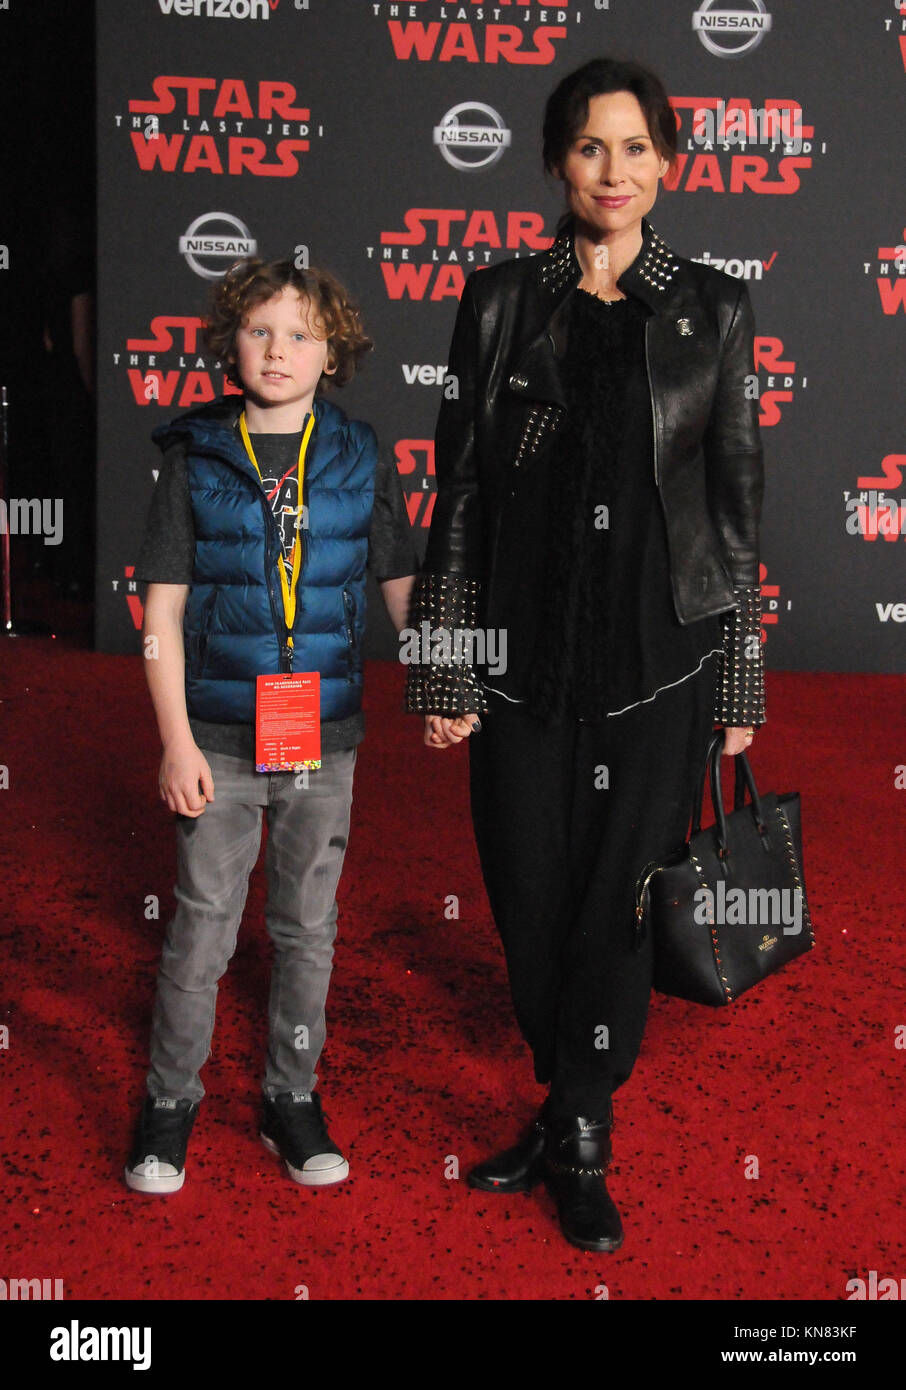 Los Angeles, USA. 09th Dec, 2017. Actress Minnie Driver (R) and son Henry Story Driver (L) attend the World Premiere of Disney Pictures and Lucasfilm's 'Star Wars: The Last Jedi' at The Shrine Auditorium on December 9, 2017 in Los Angeles, California. Photo by Barry King/Alamy Live News Credit: Barry King/Alamy Live News Stock Photo